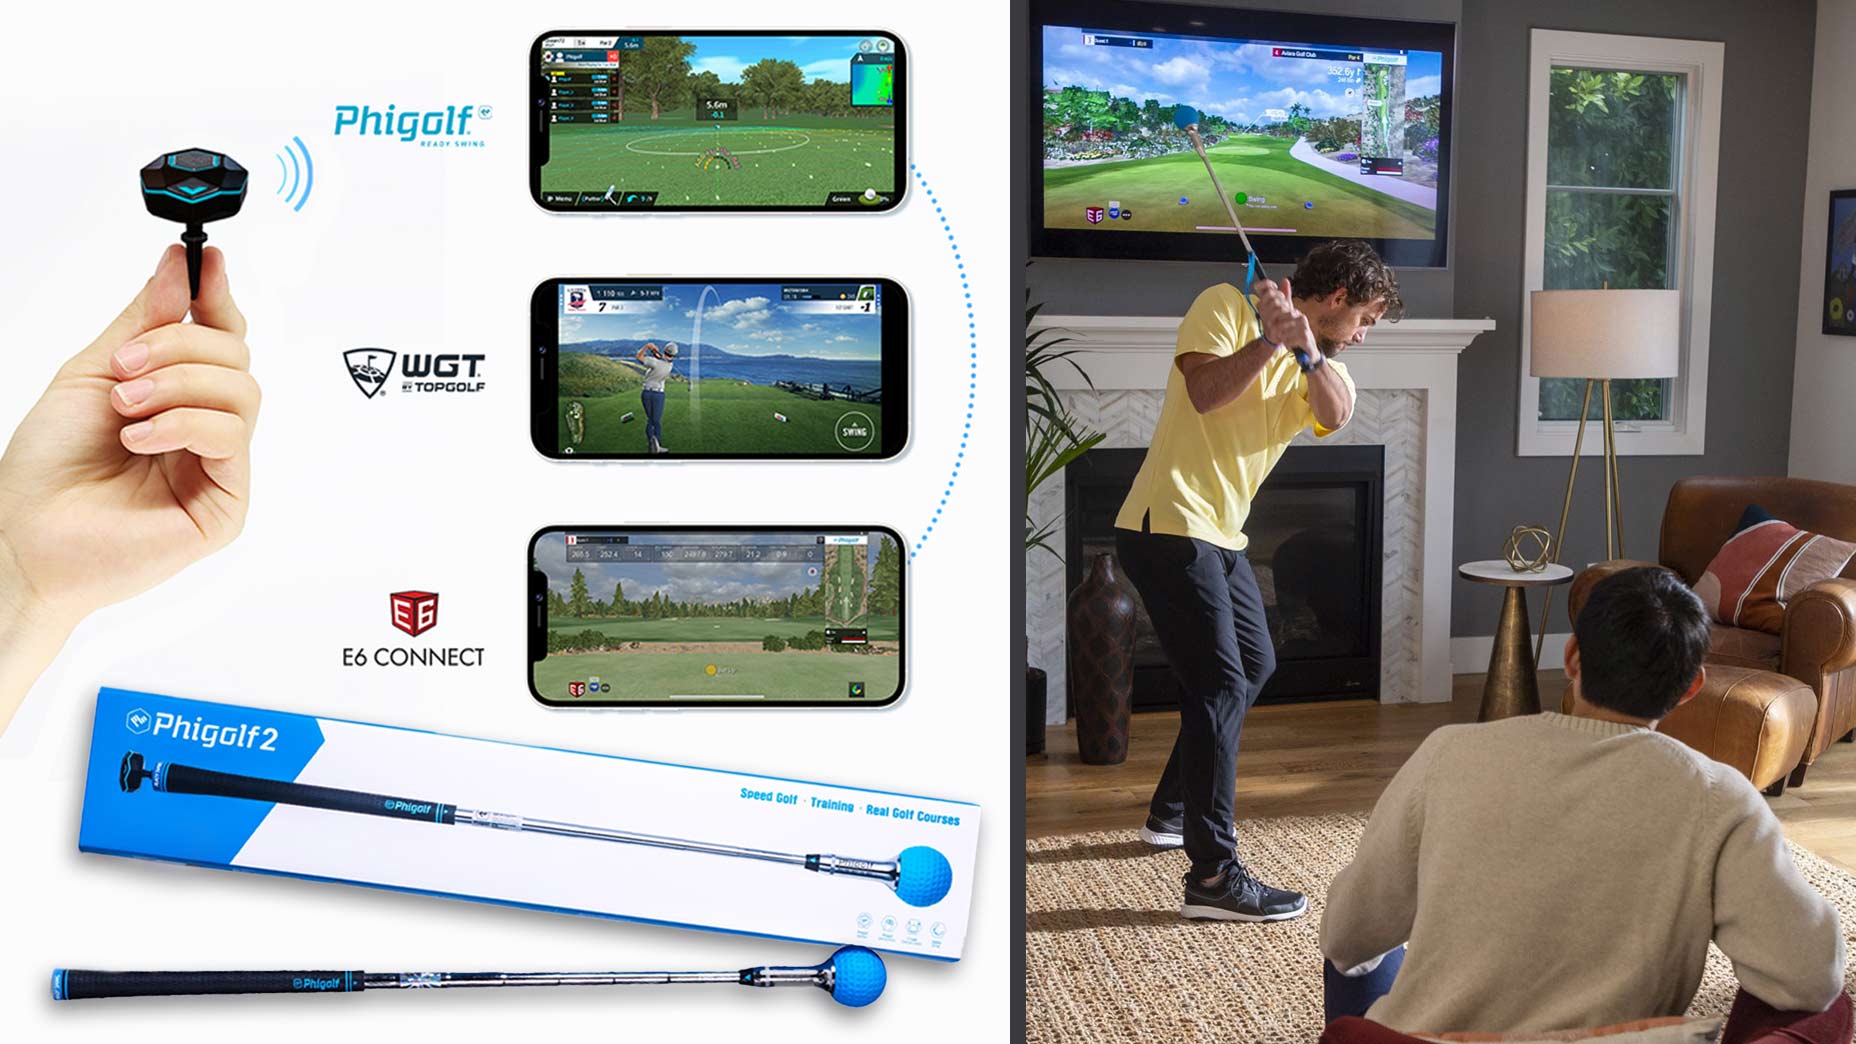 I tested 1 of the most affordable golf simulators on the market